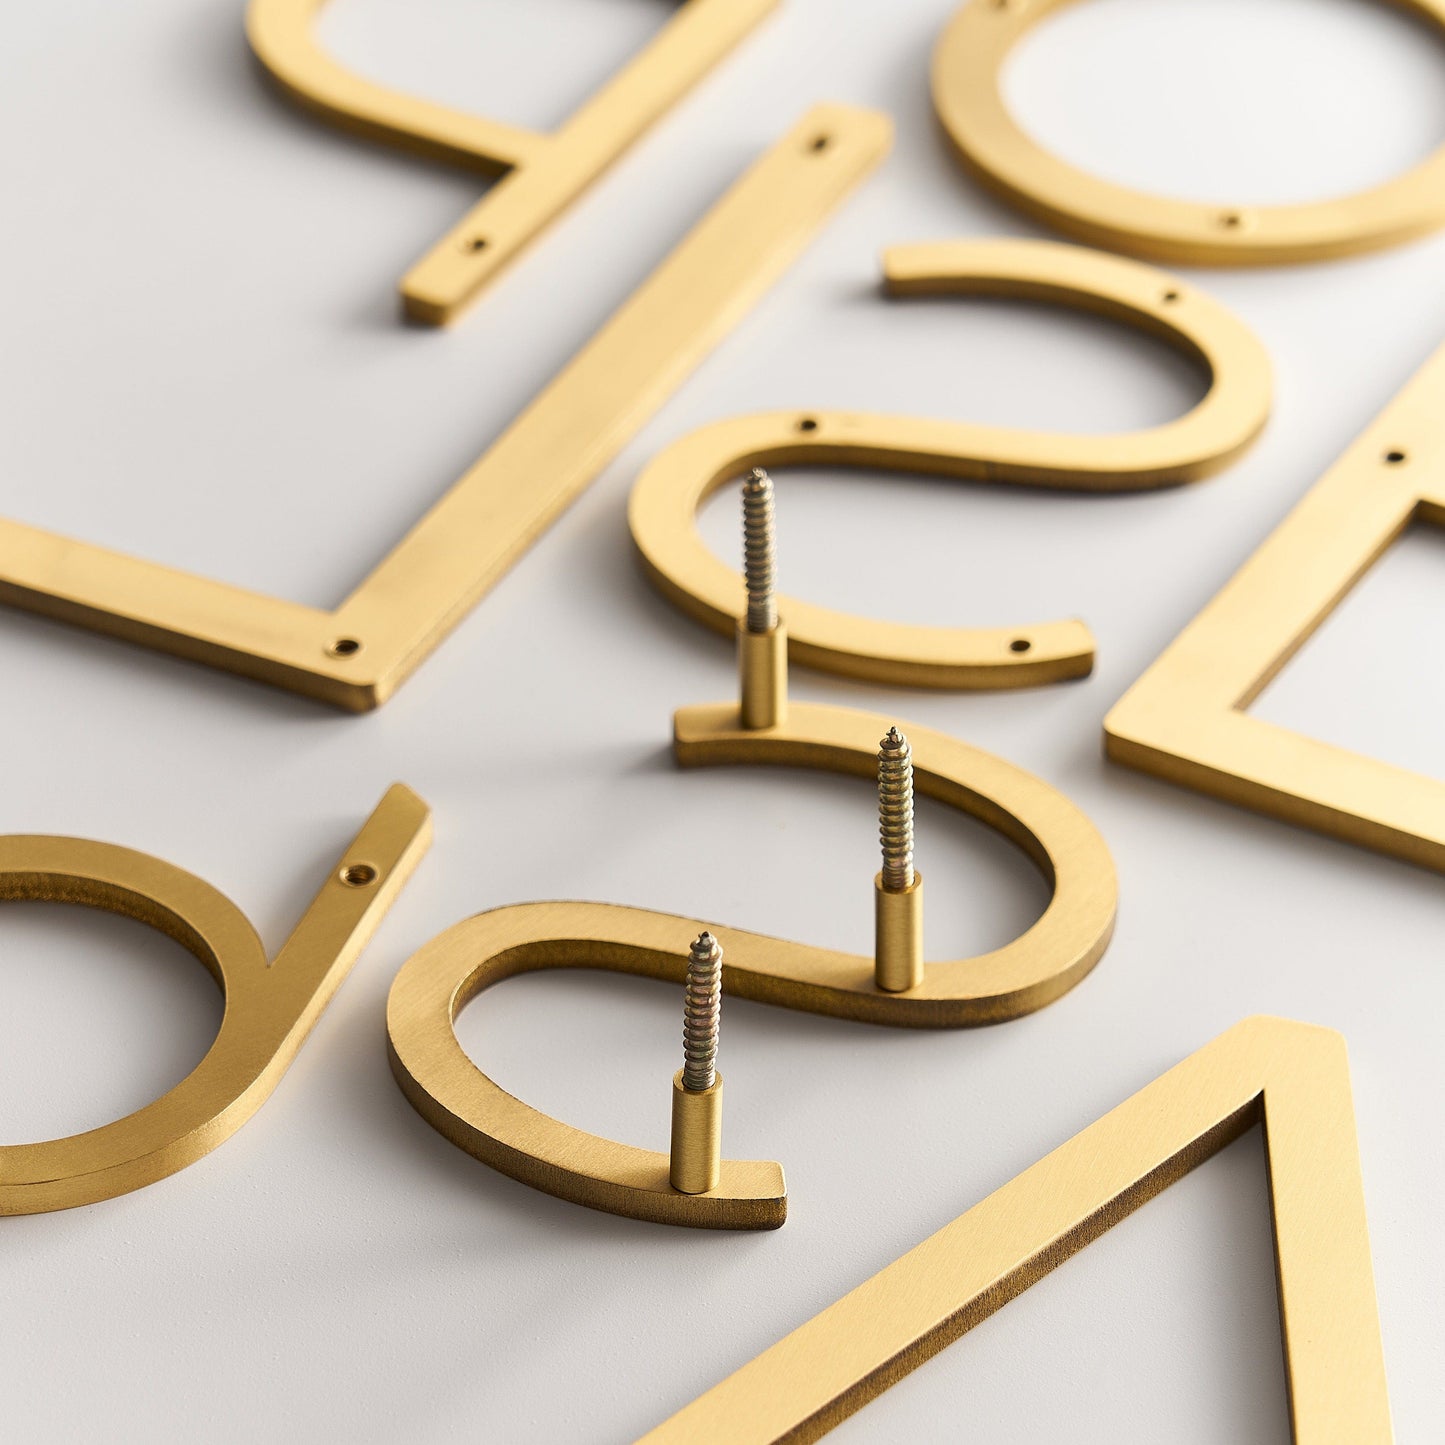 House Numbers and Letters Bayside Luxe Signage - Solid Satin Brass Floating House Numbers and Letters - Watson's Bay 25cm